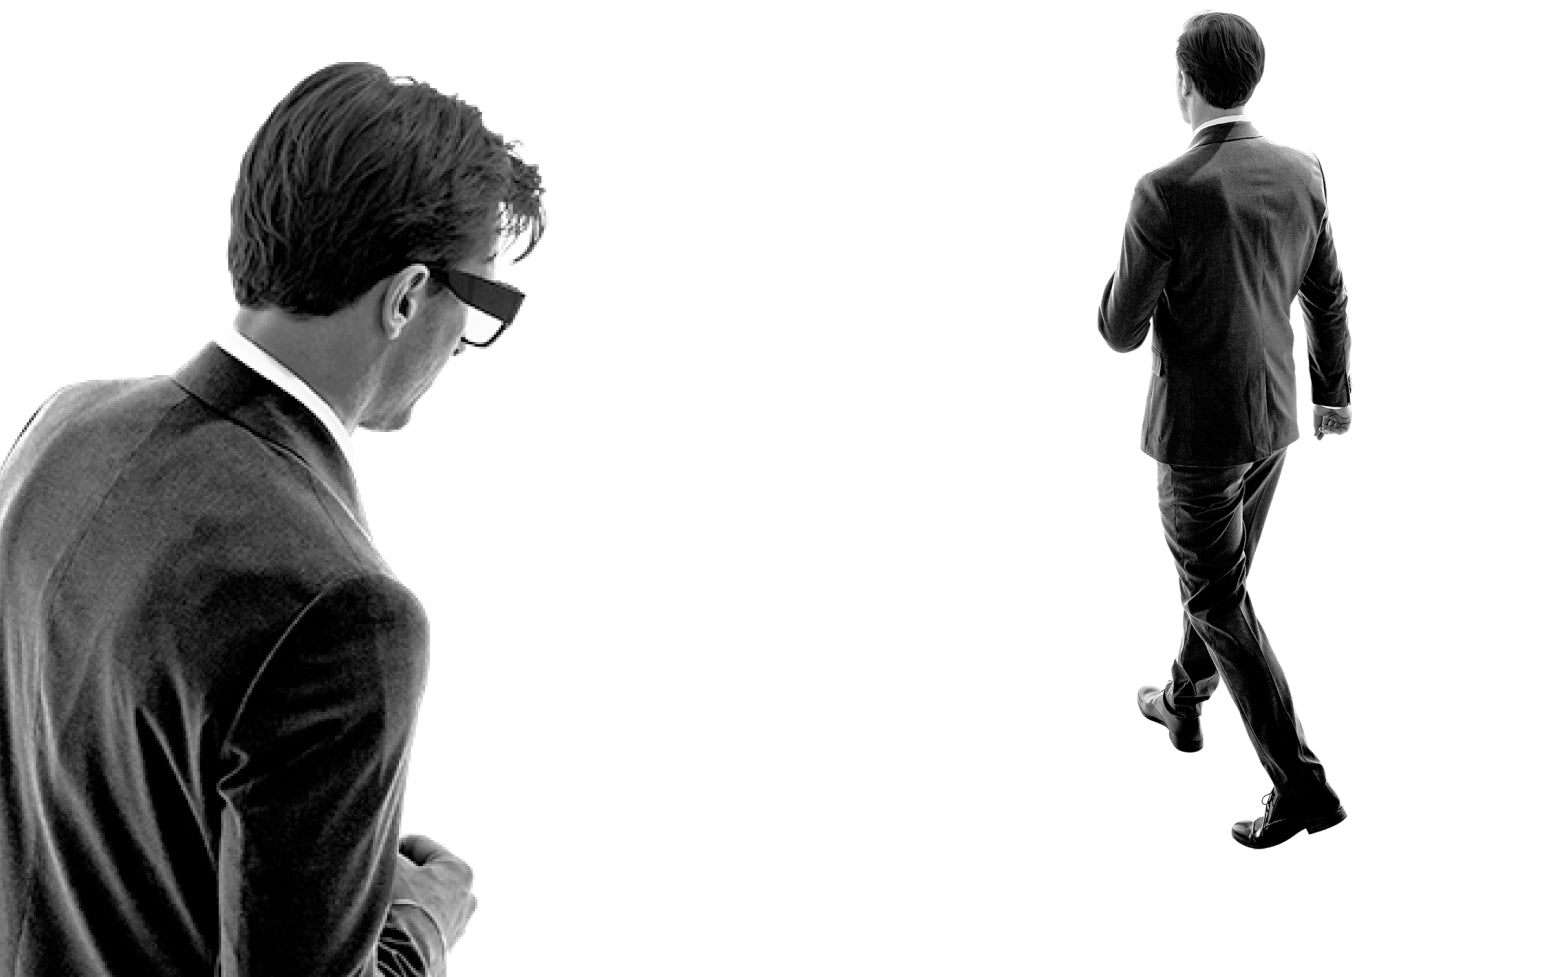 man walking away and man with glasses looking down